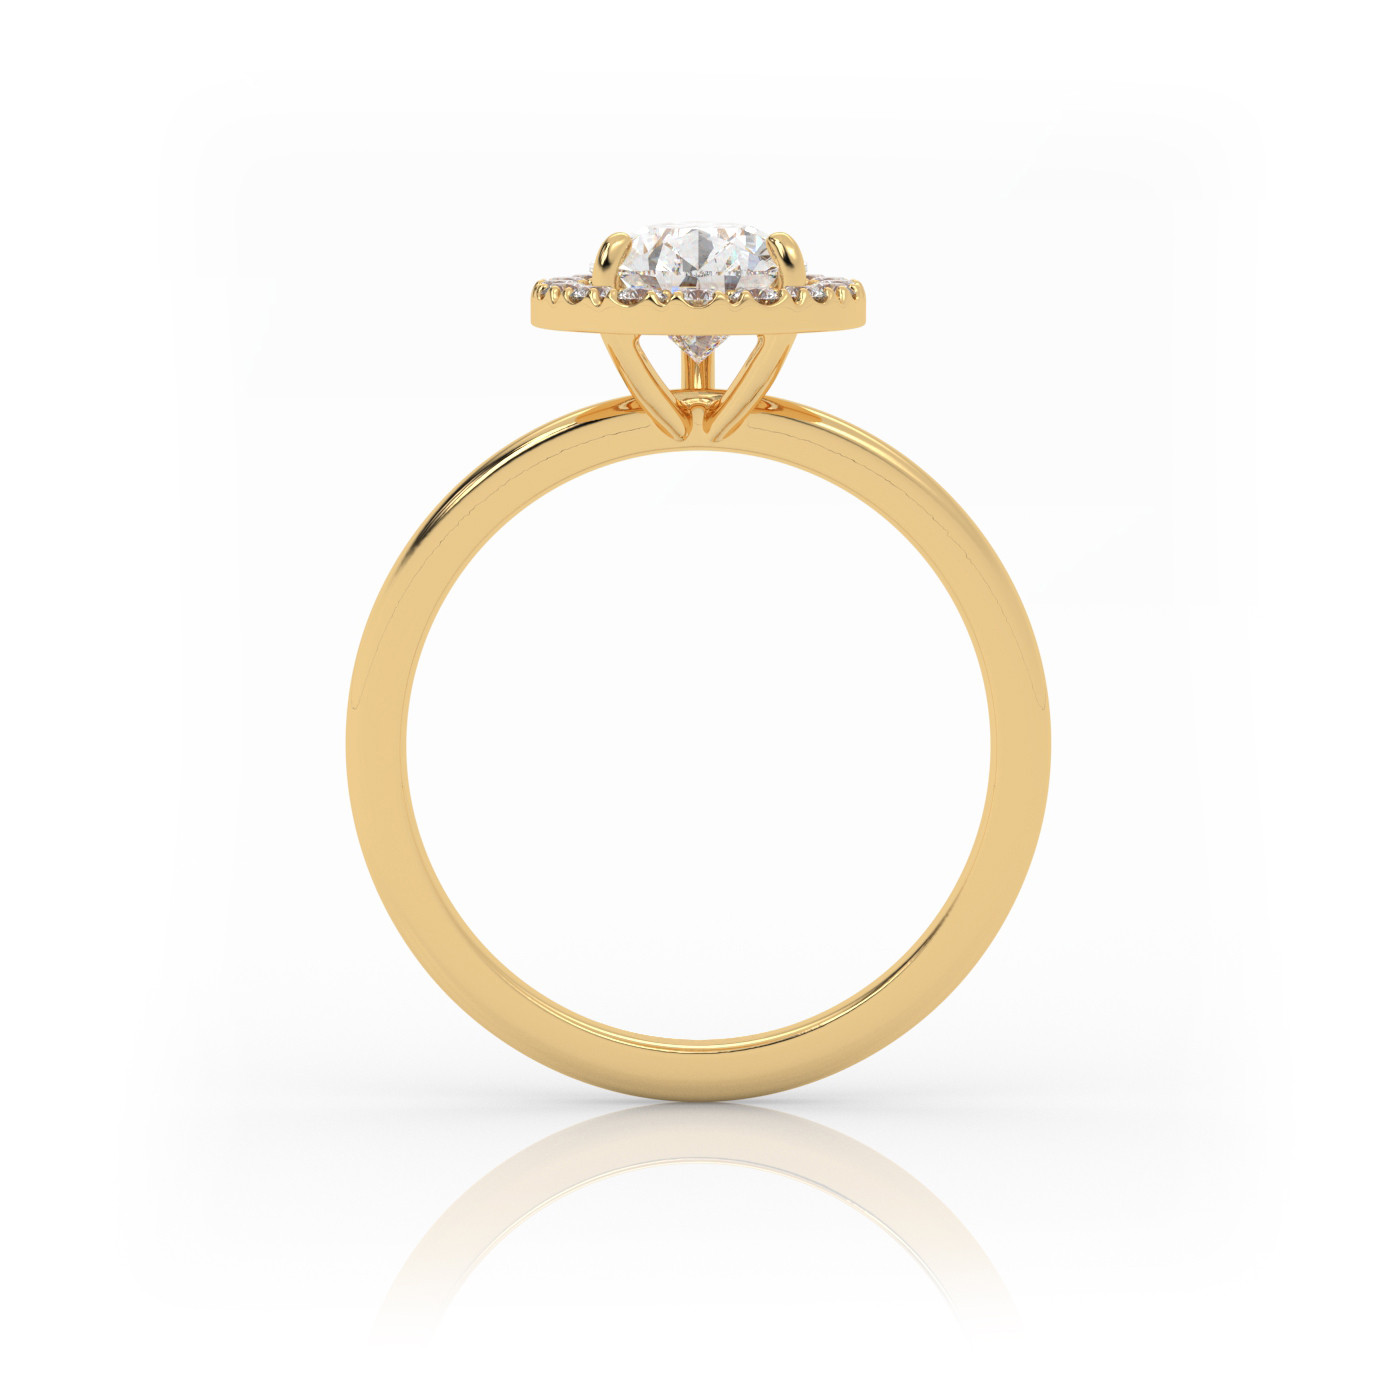 18K YELLOW GOLD Pear Diamond Cut Engagement Ring with Halo Style